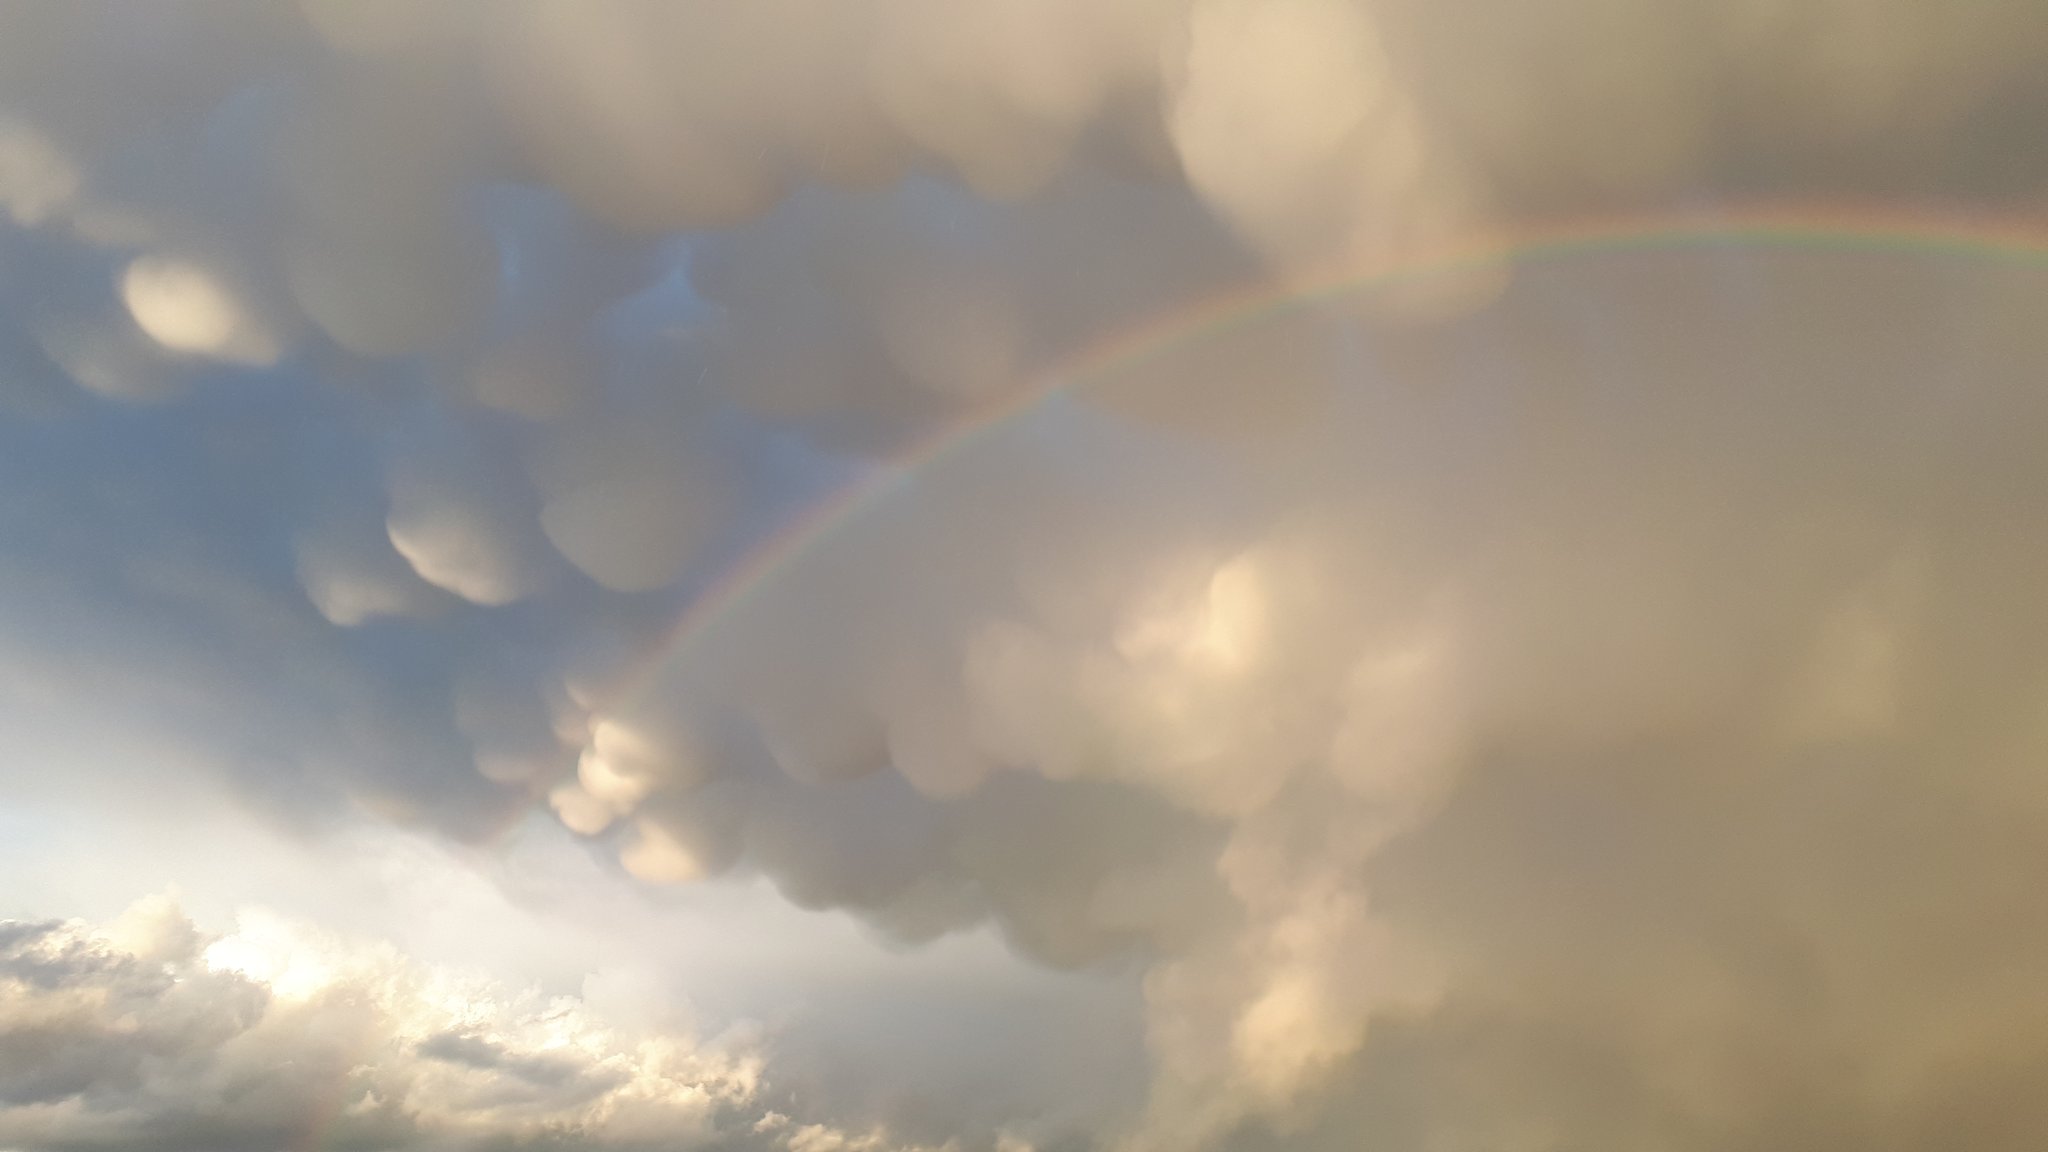 2nd Place Mammatus and rainbow at Manresa, Catalonia by Elisabet Roch @elisabetroch